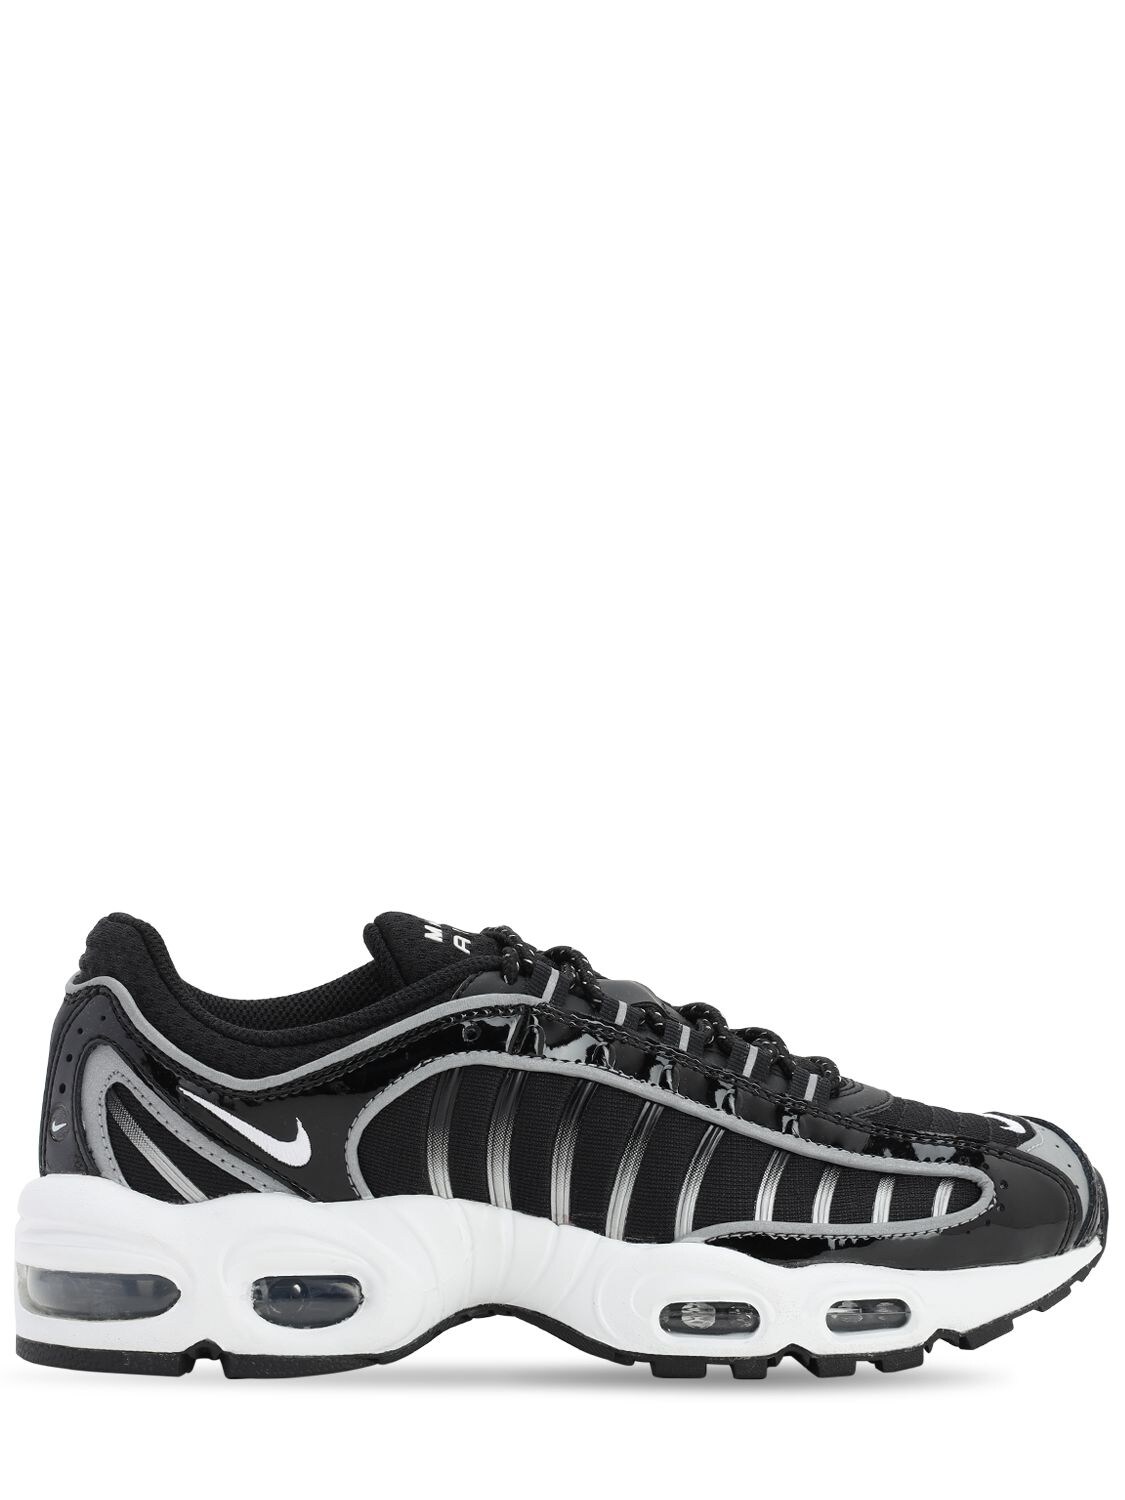 Buy W Air Max Tailwind Iv Nrg Sneakers 